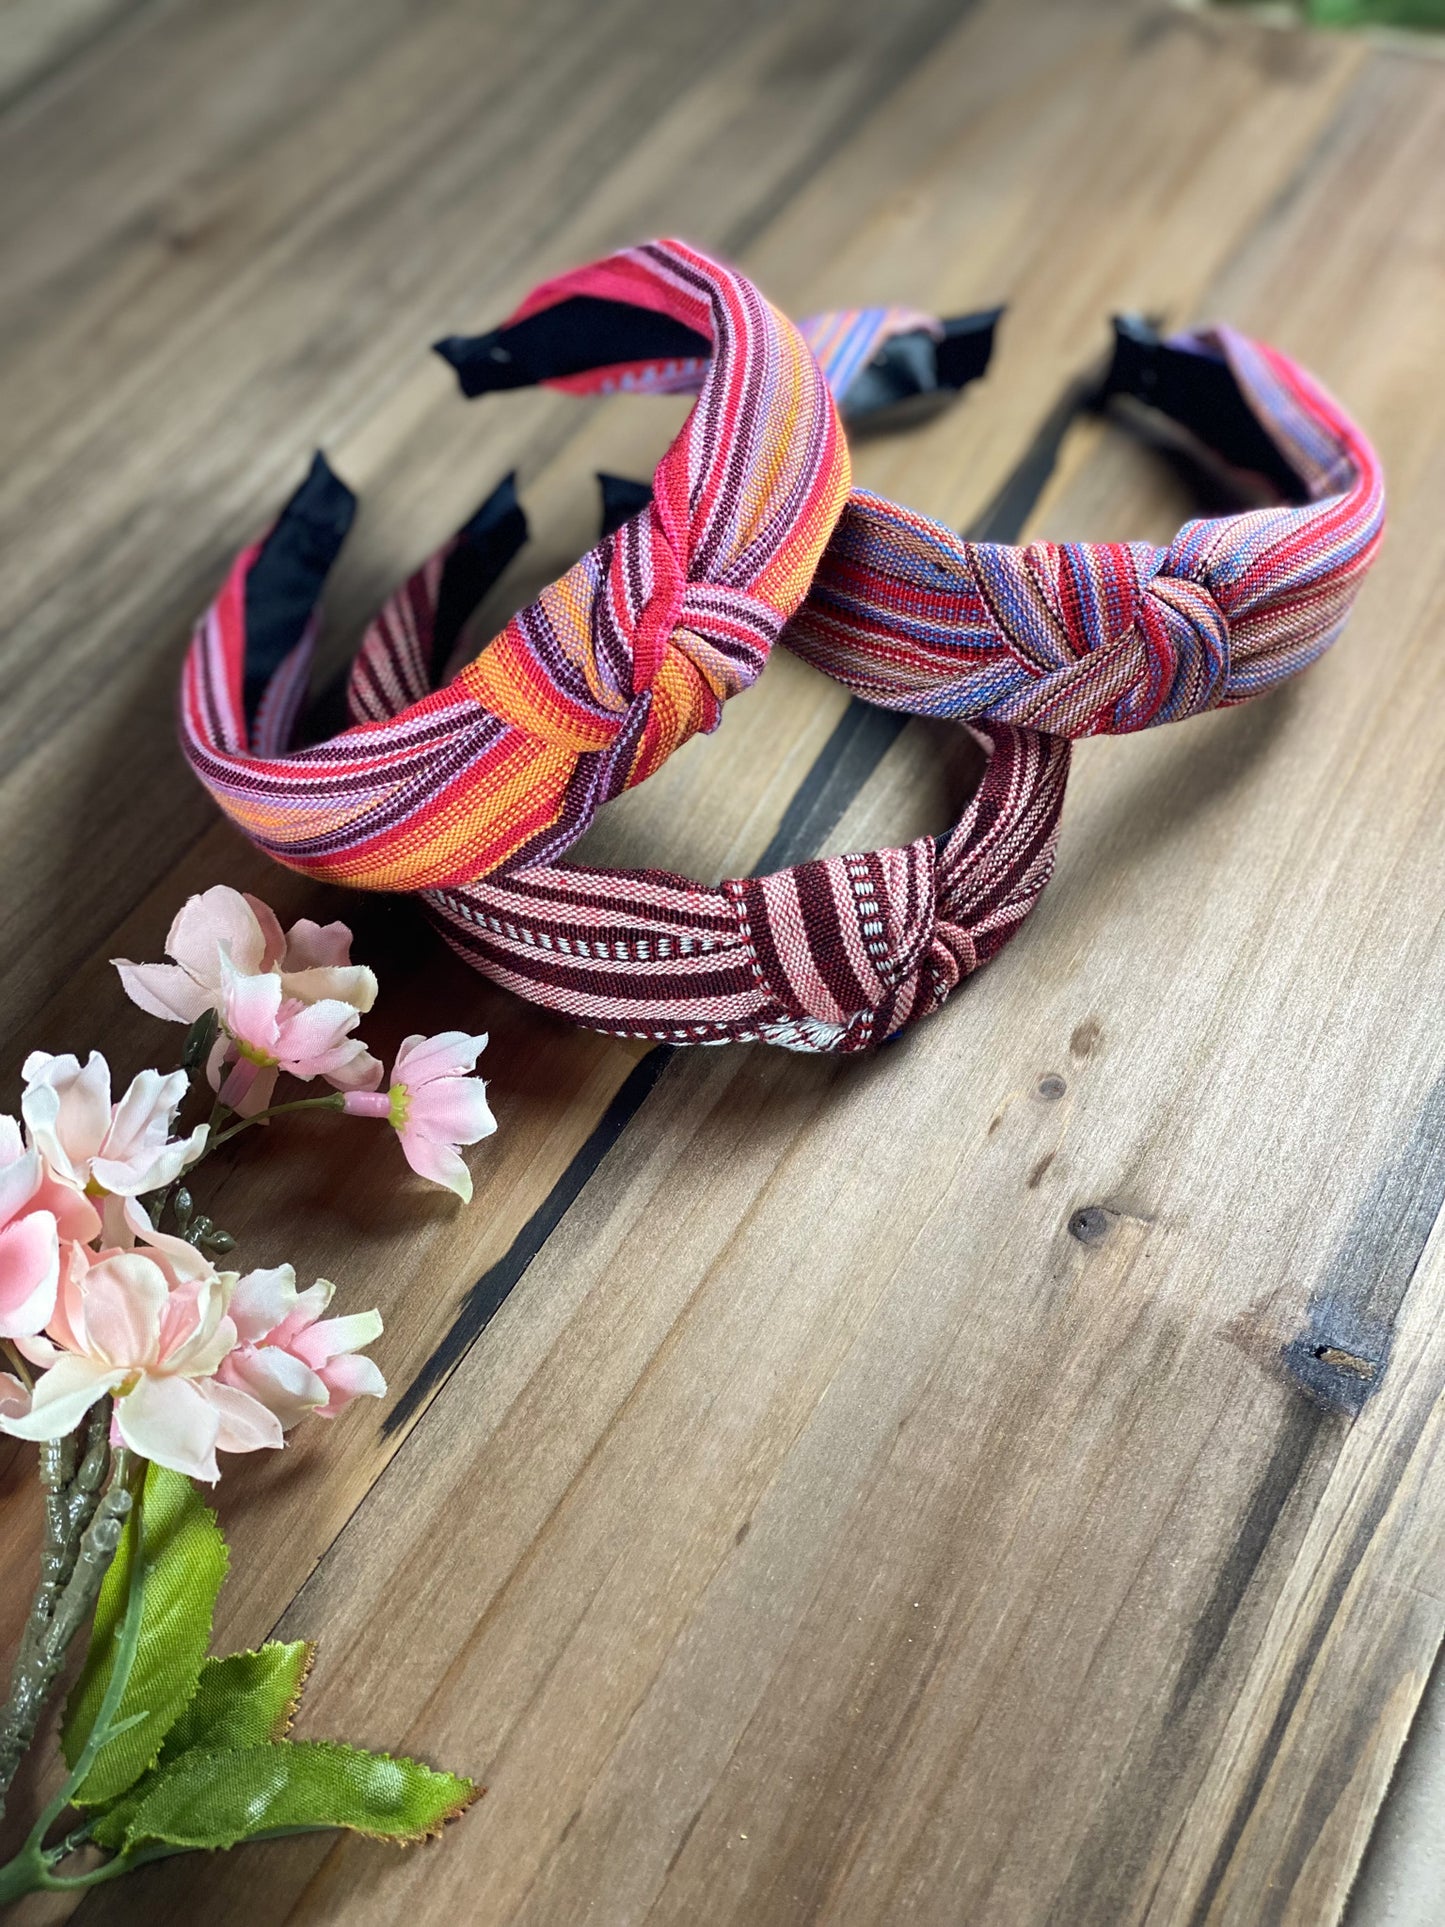 Jalapa Headbands. Handmade in Guatemala Handwoven Interacted Fabric Knotted Detail Available in 5 different styles. Perfect for that pop of color in summer! All these pink headbands are very comfortable and adjustable.